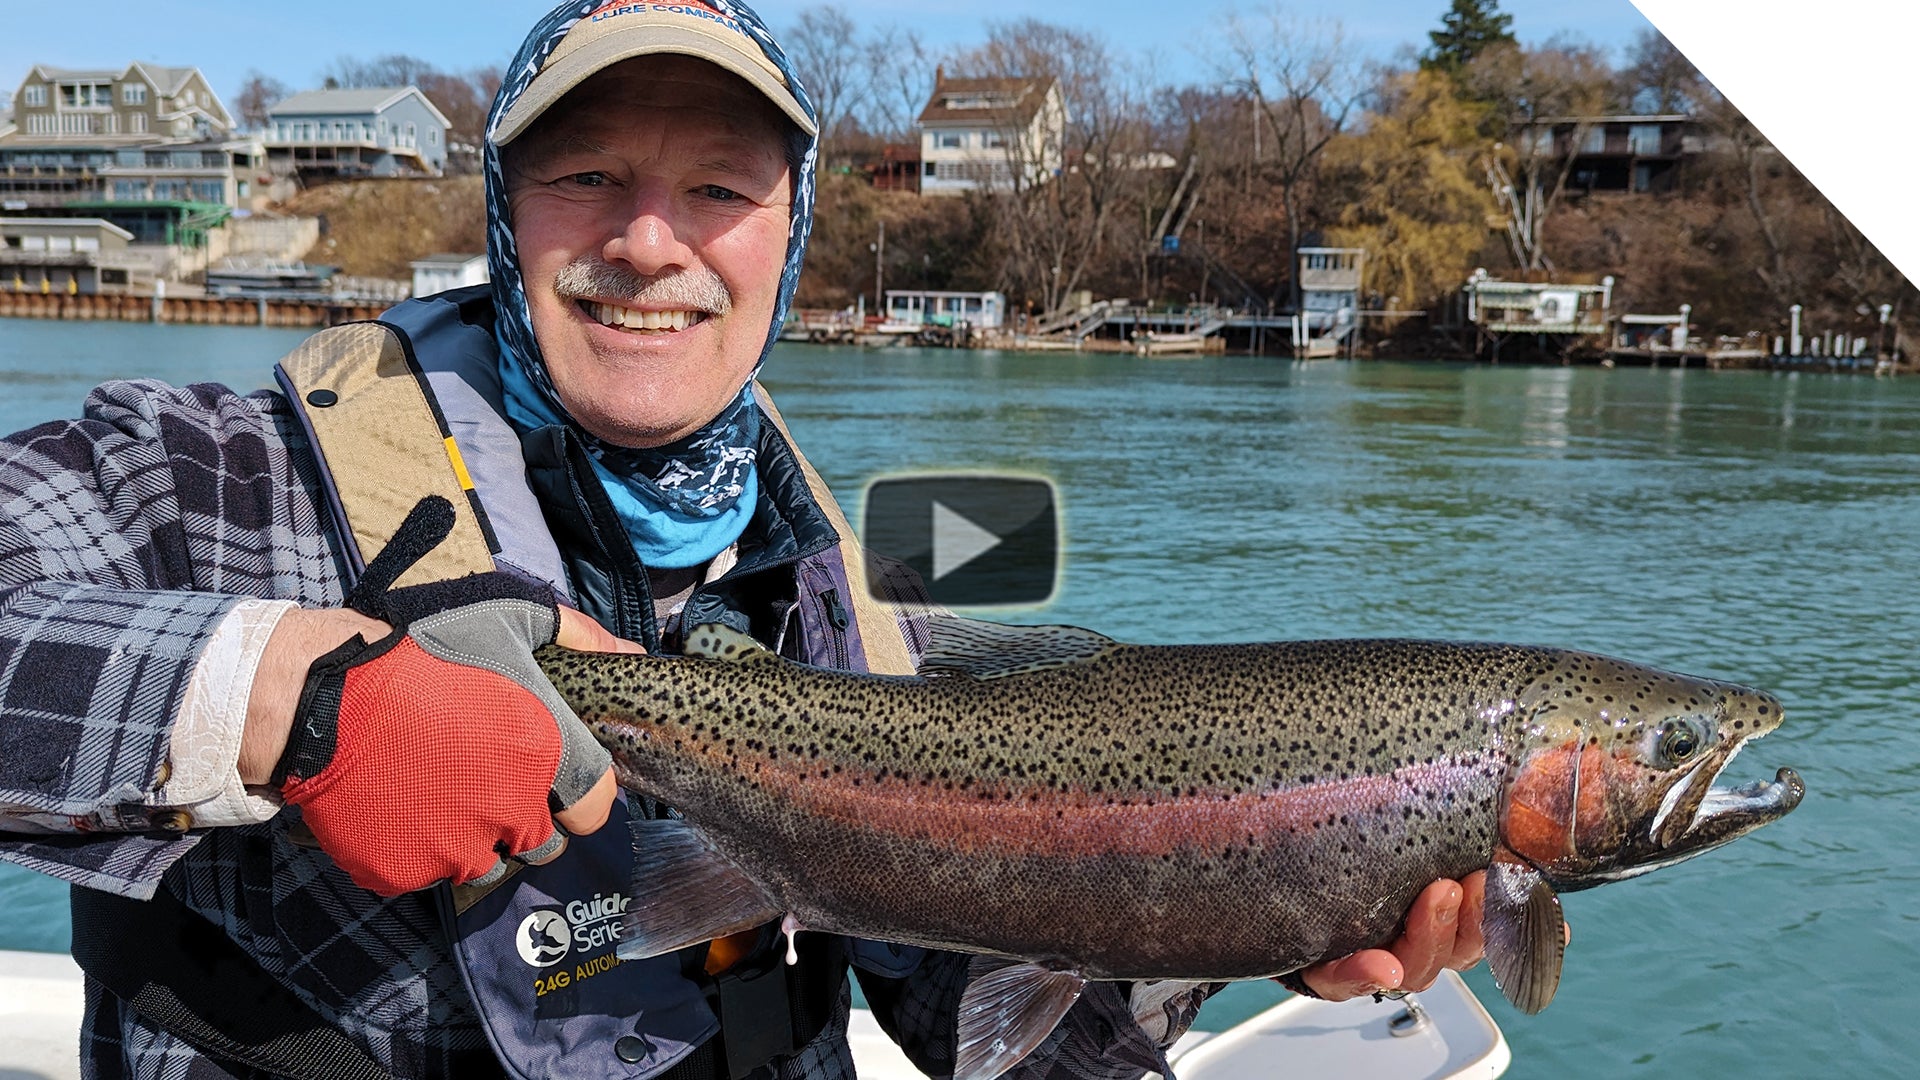 How to catch steelhead trout in a river